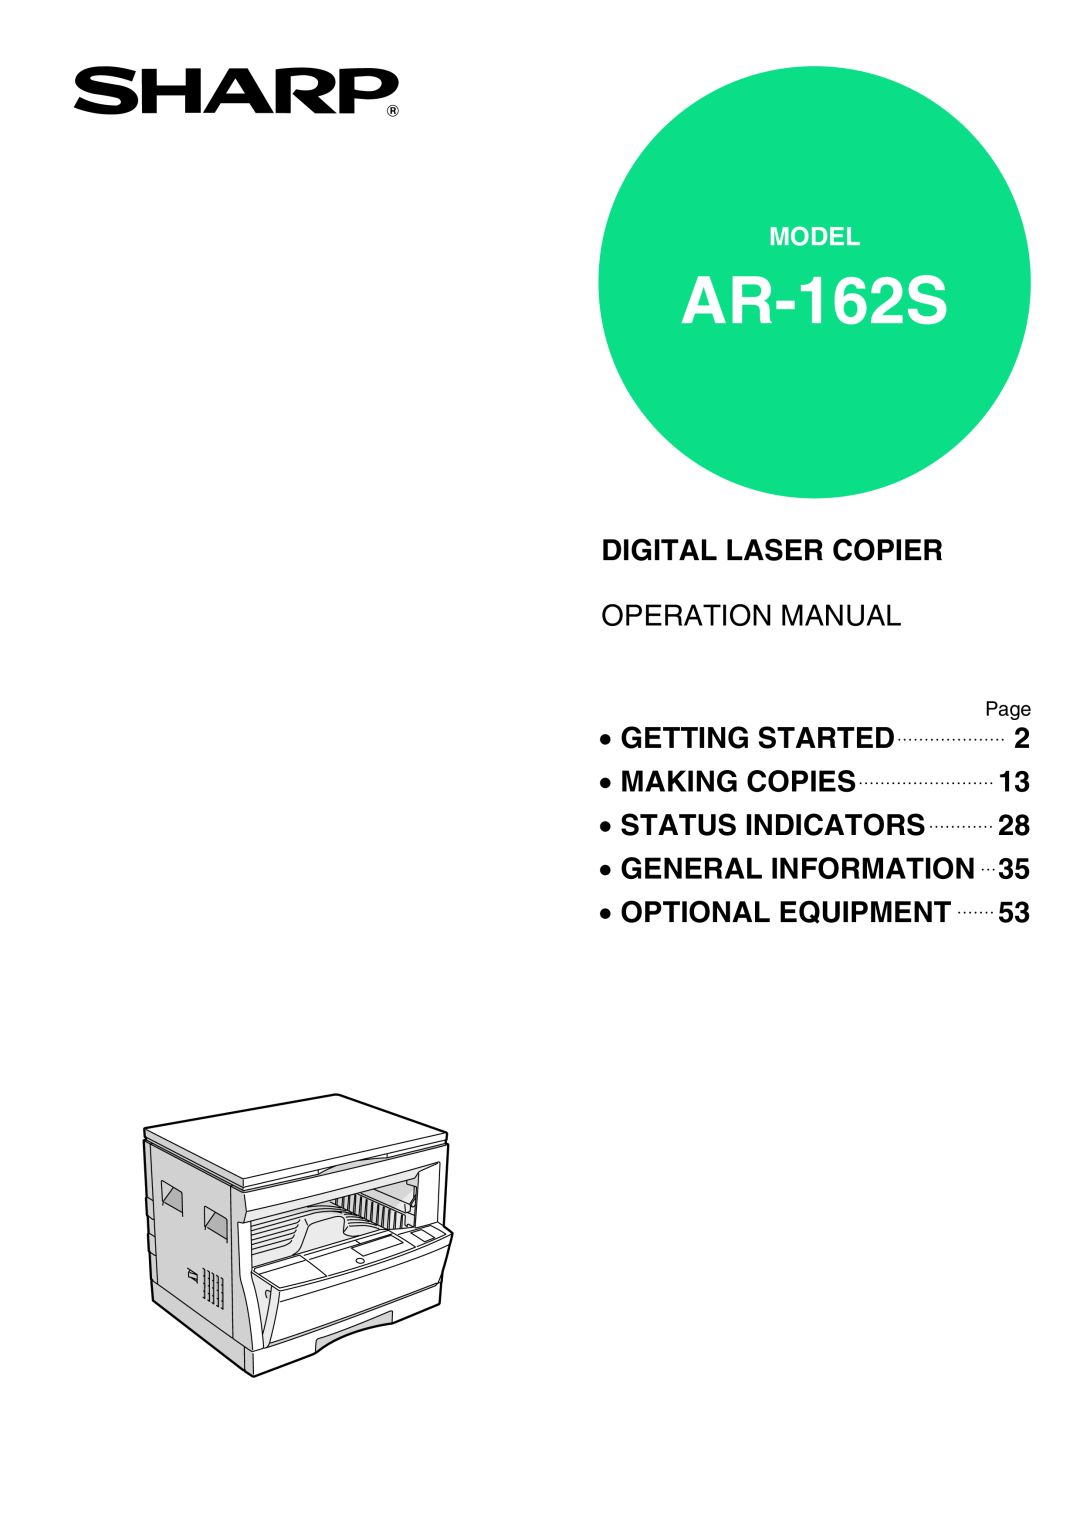 Sharp AR-162S operation manual Model, Page, Digital Laser Copier, Operation Manual, Getting Started, Making Copies 